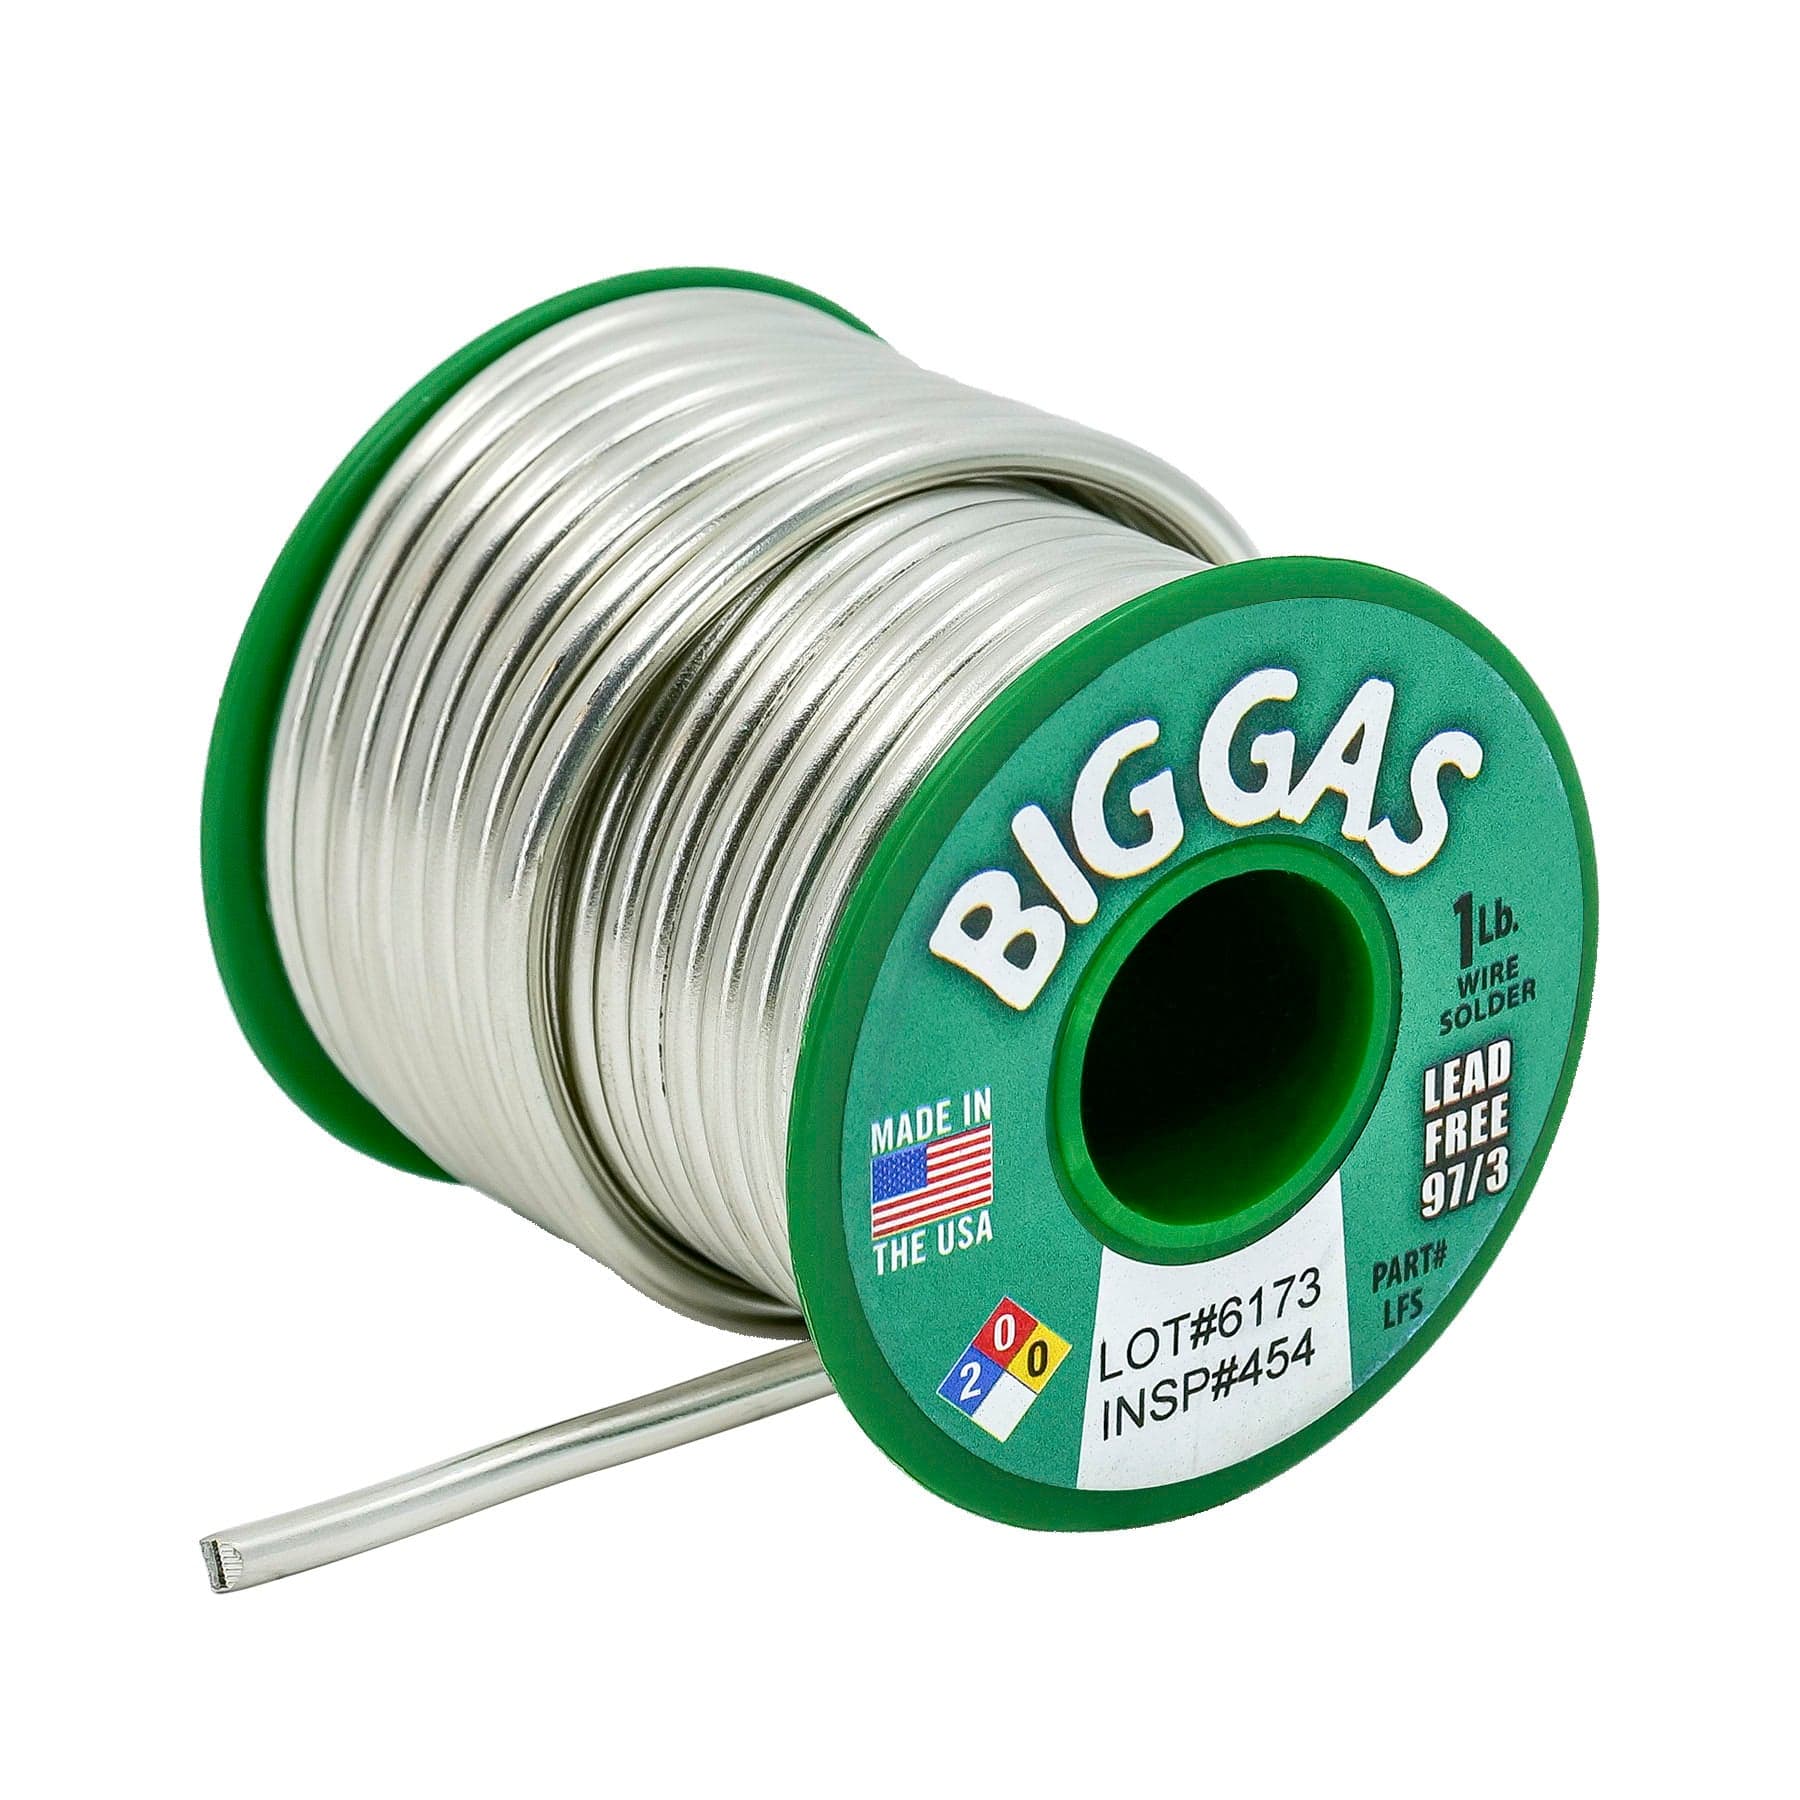 Big Gas 97/3 Solder - 1 Lb. Spool - Made in The USA